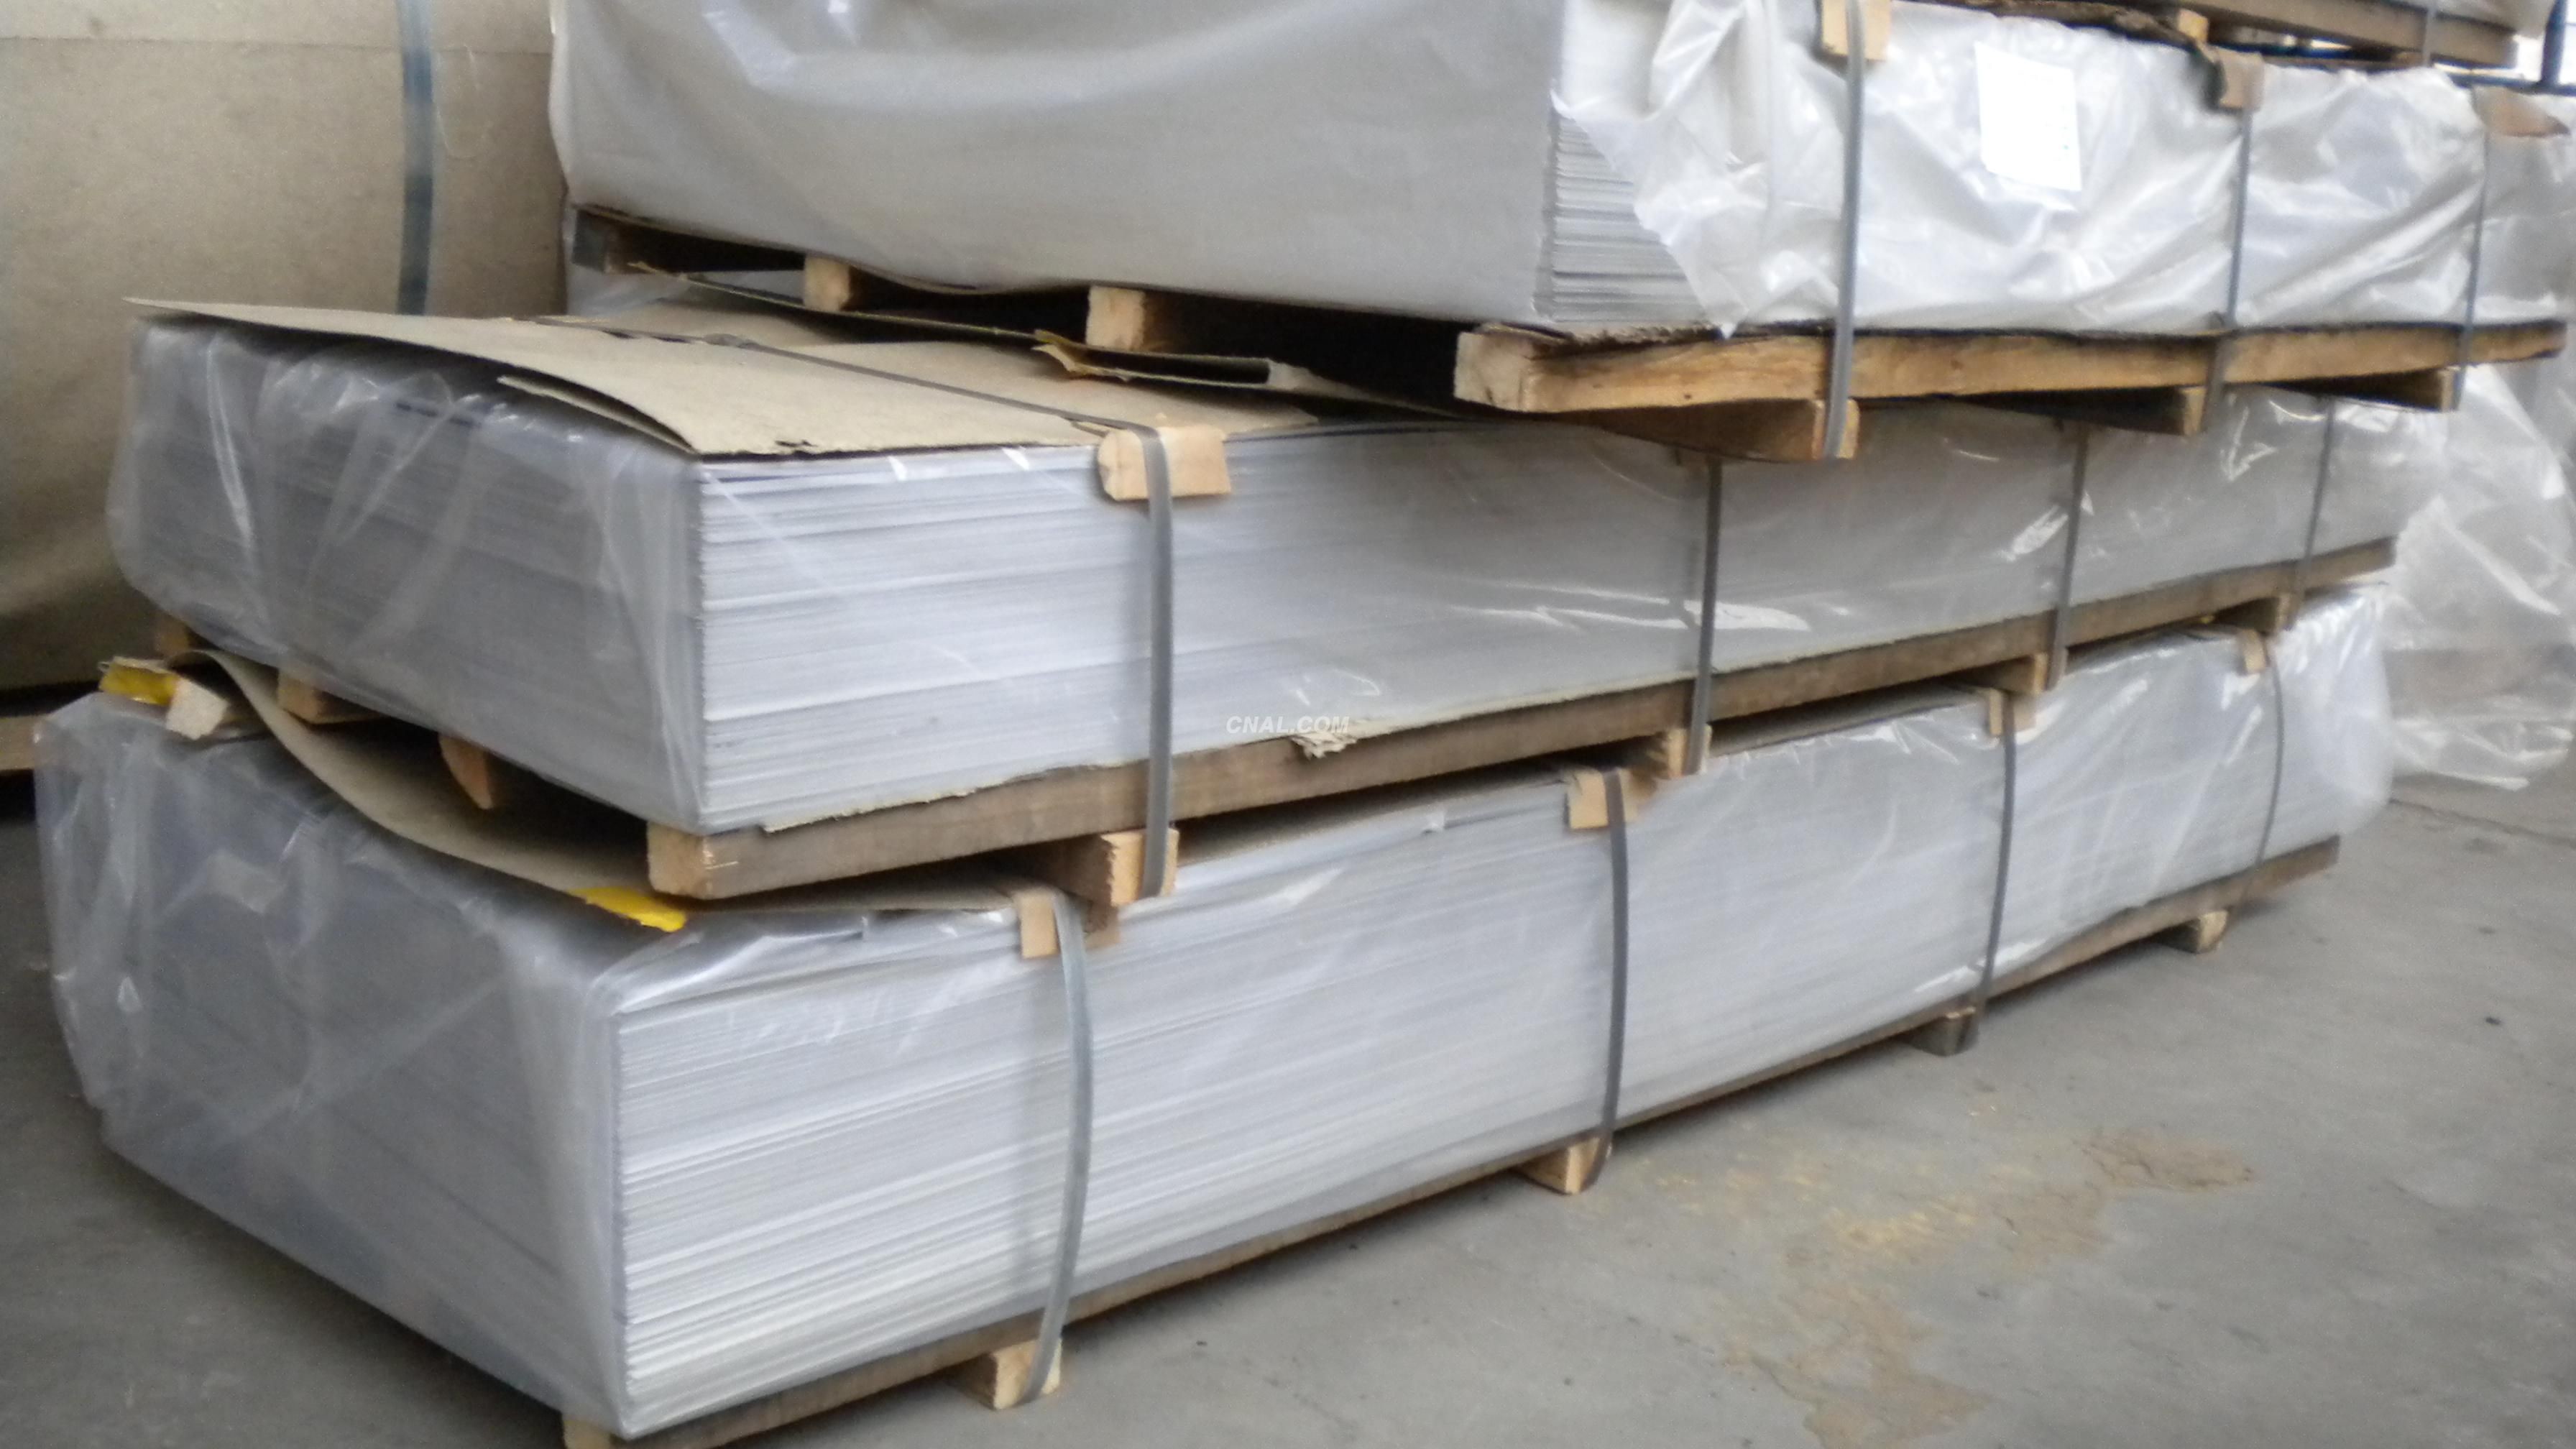 Wholesale Precision Ground 6061 Aluminium Plate 3/16" 1/4" 6061 Aluminum Sheet Metal 4x8 Bending from china suppliers